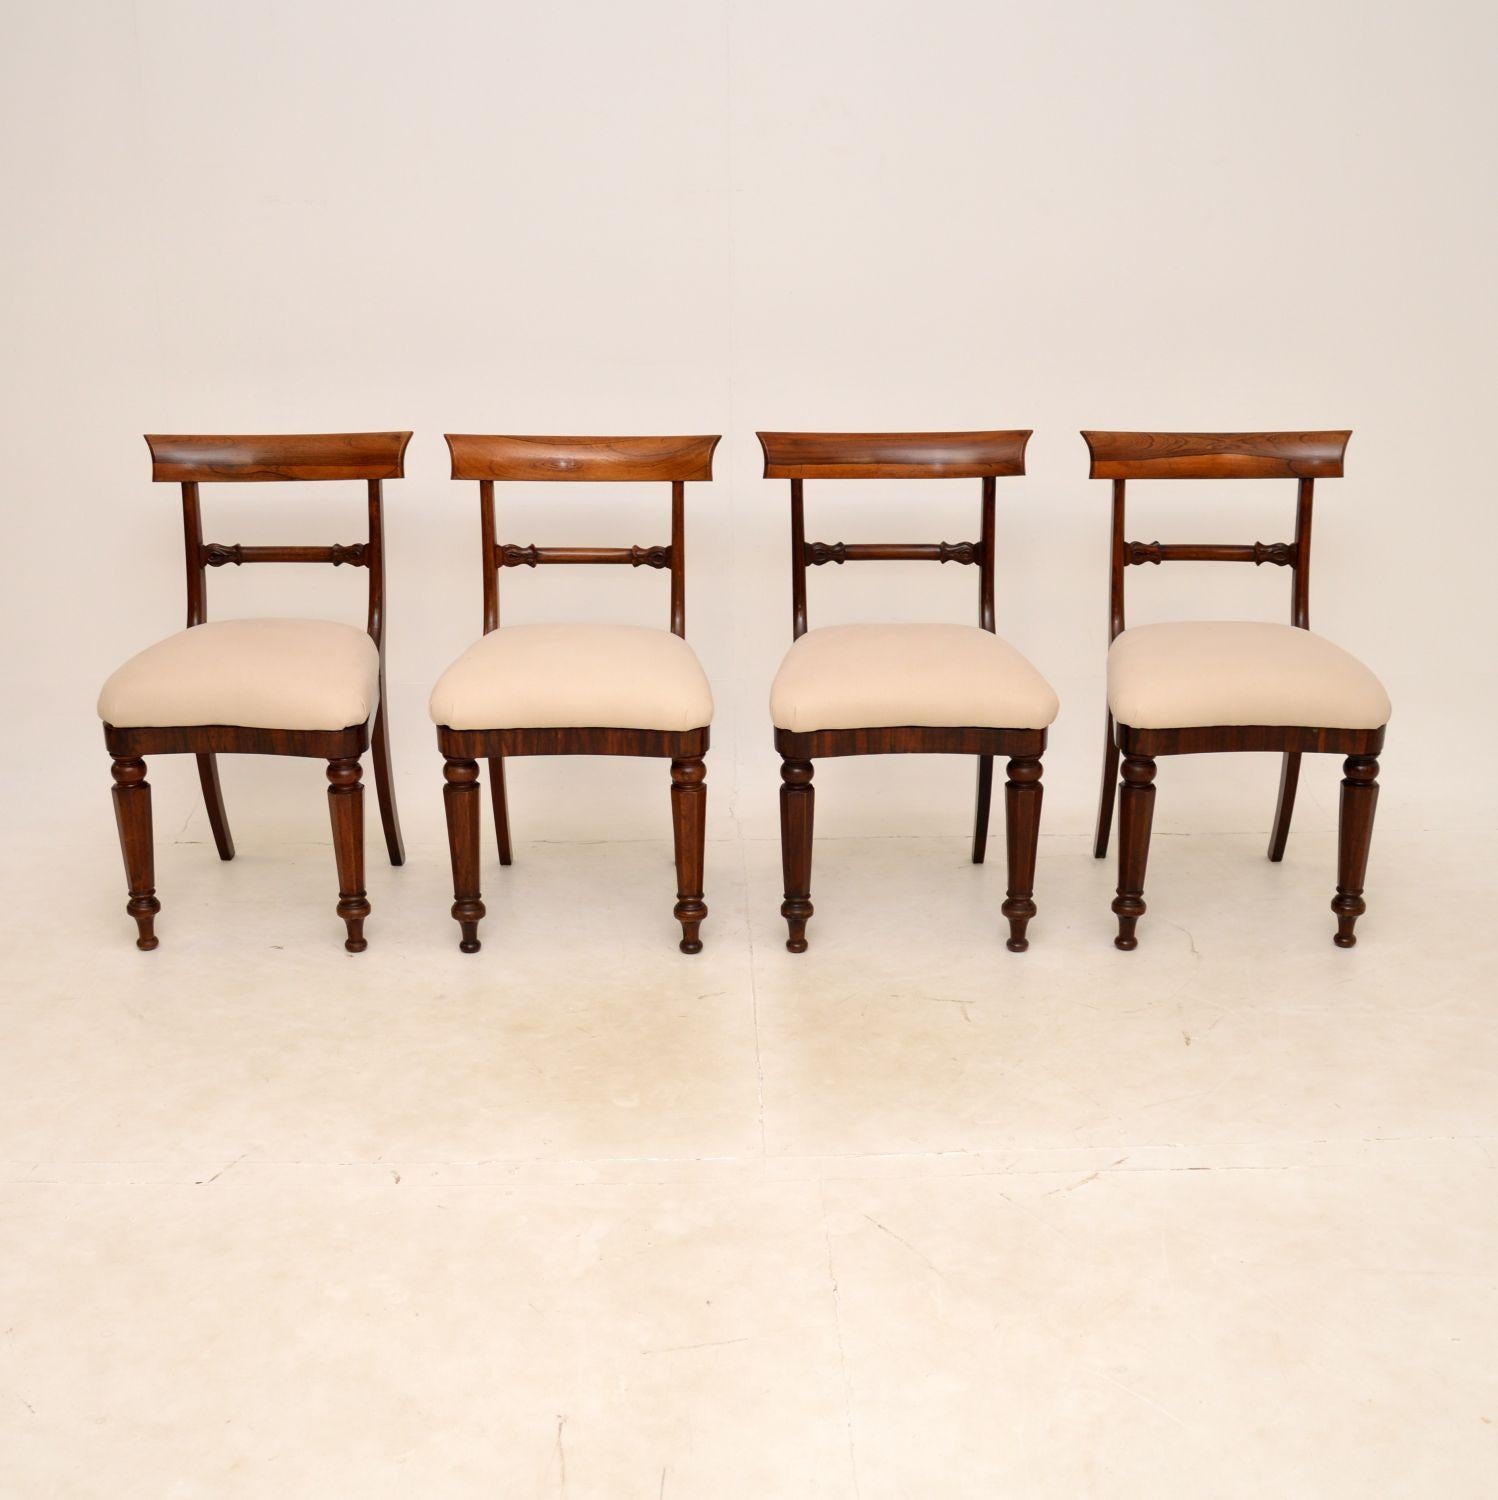 A fantastic set of four solid dining chairs from the William IV period. They were made in England, and they date from around 1830-40.

The quality is outstanding, they are very sturdy and supportive. They have beautifully shaped pierced Trafalgar